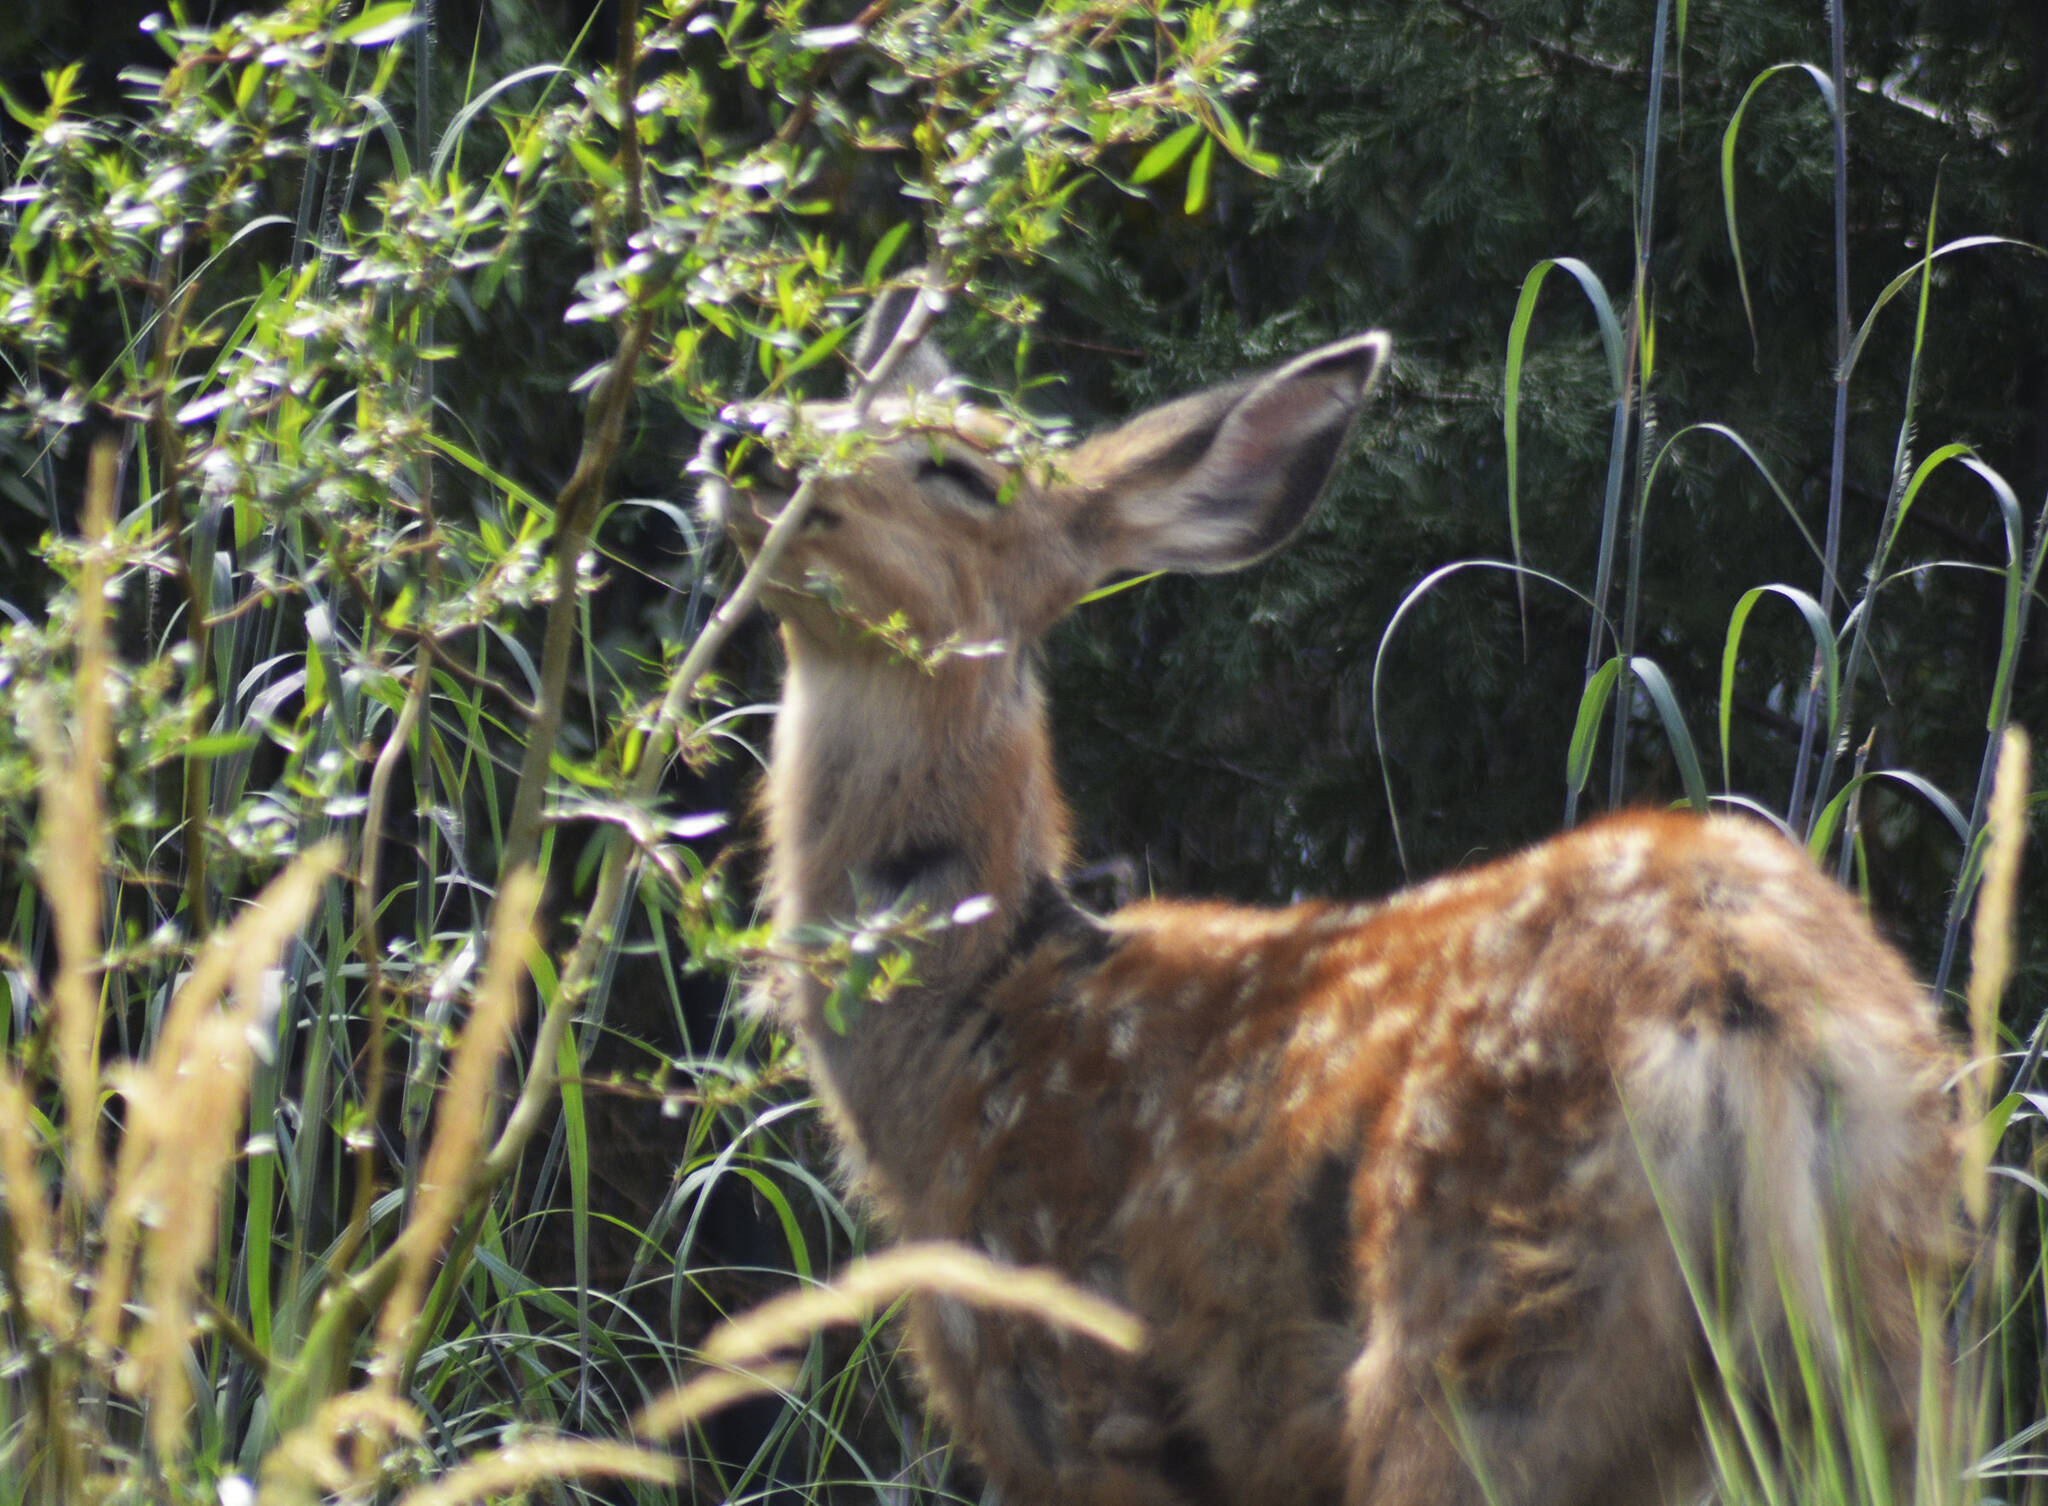 In late August, wildlife moves down to the lowlands. This fawn nibbled on leaves right next to a busy marina restaurant.